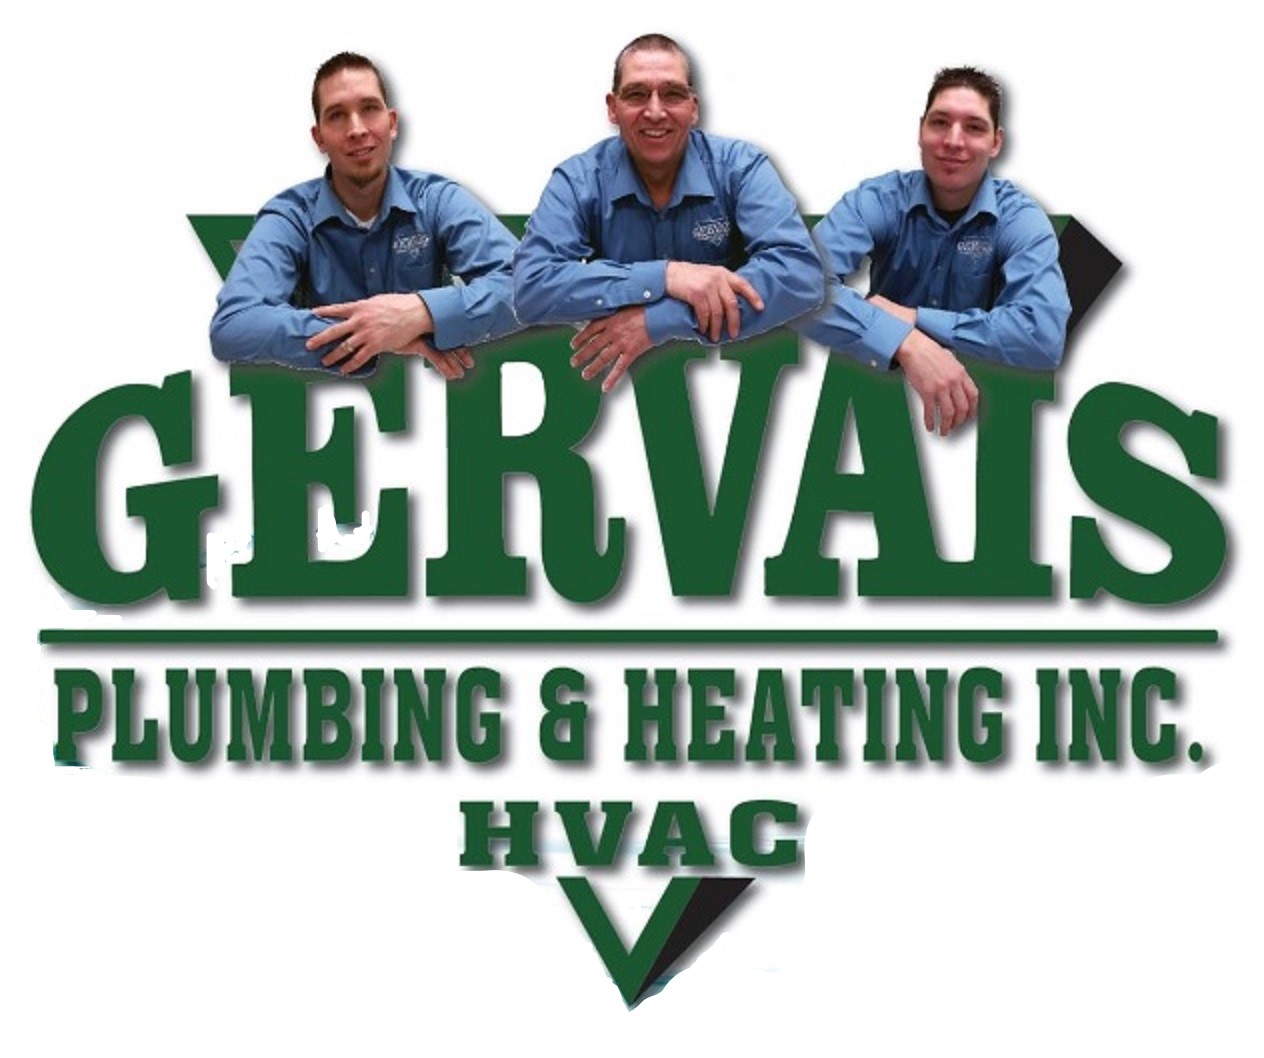 Gervais Plumbing Heating & A/C Specializes in Radiant Heat Installation in Massachusetts.